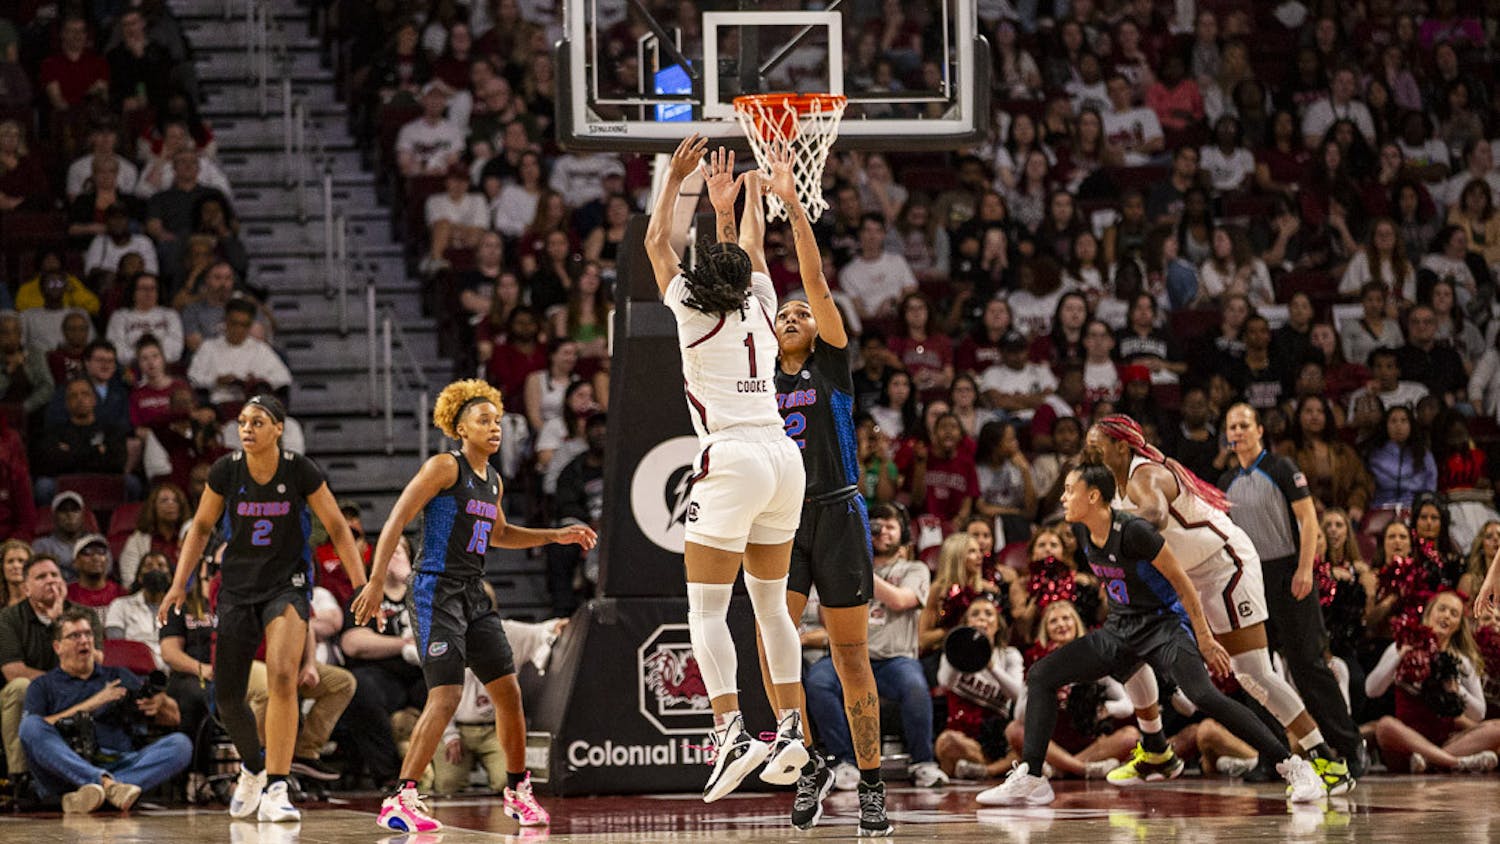 The Gamecocks beat the Florida Gators for the 15th consecutive time on Feb. 16, 2023. The Gamecocks came into the game strong, with senior guard Zia Cooke scoring 22 points and senior guard Brea Beal scoring 14 points. South Carolina improved its shooting game since last week's match against LSU, scoring 47.1% of its 3-point attempts and 50% of its field goal attempts. The Gamecocks beat the Gators 87-56.